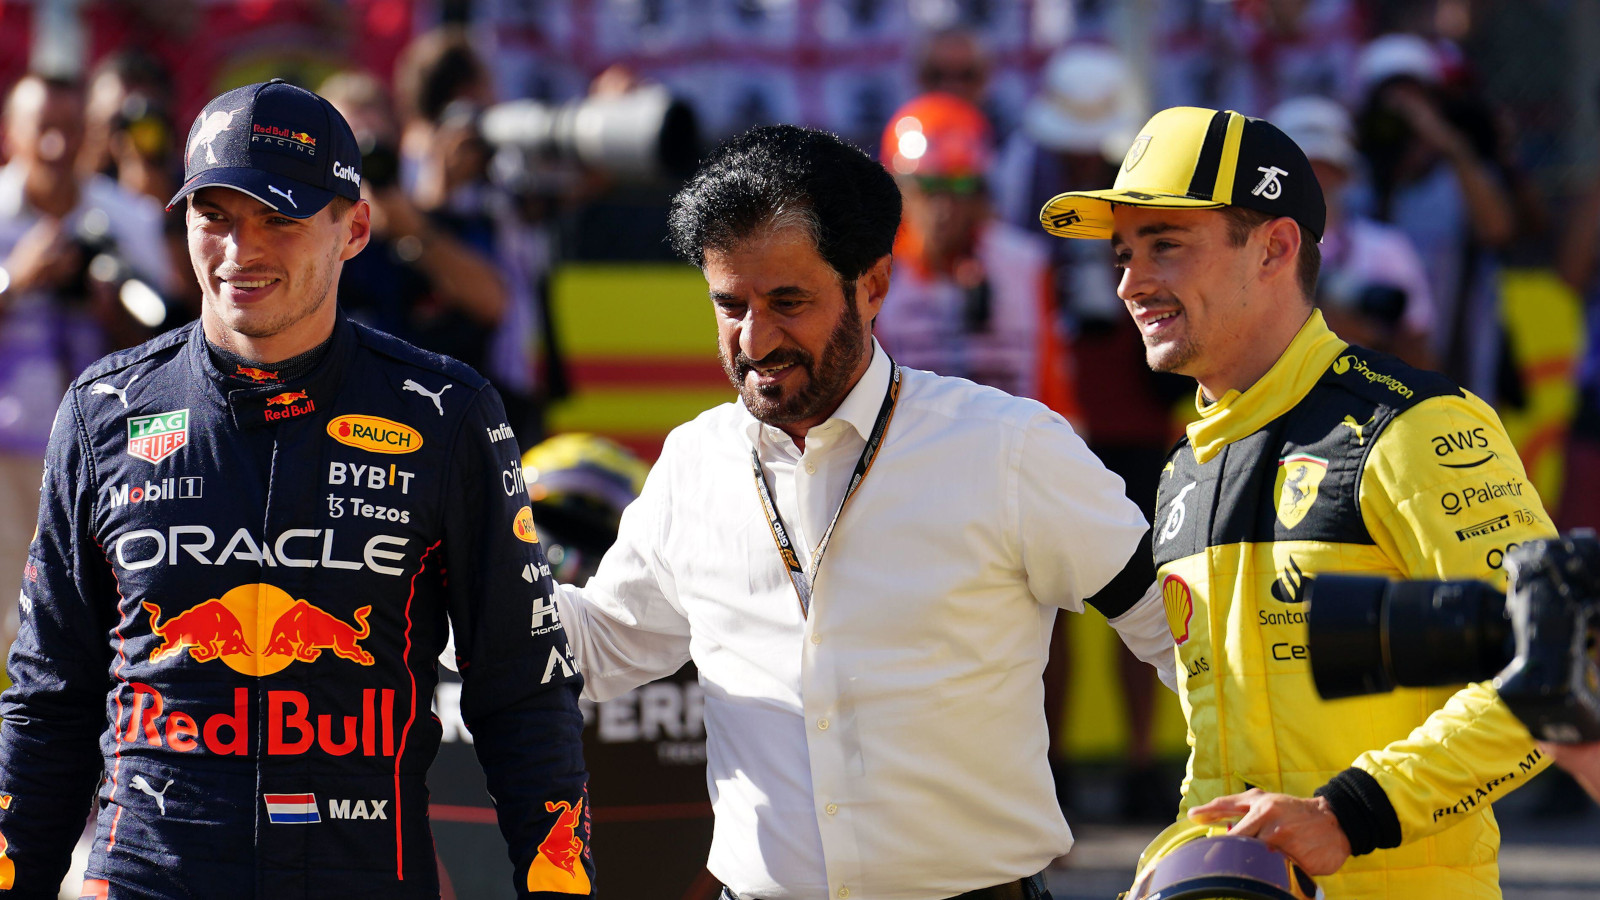 Max Verstappen and Charles Leclerc walking with Mohammed Ben Sulayem. Italy September 2022